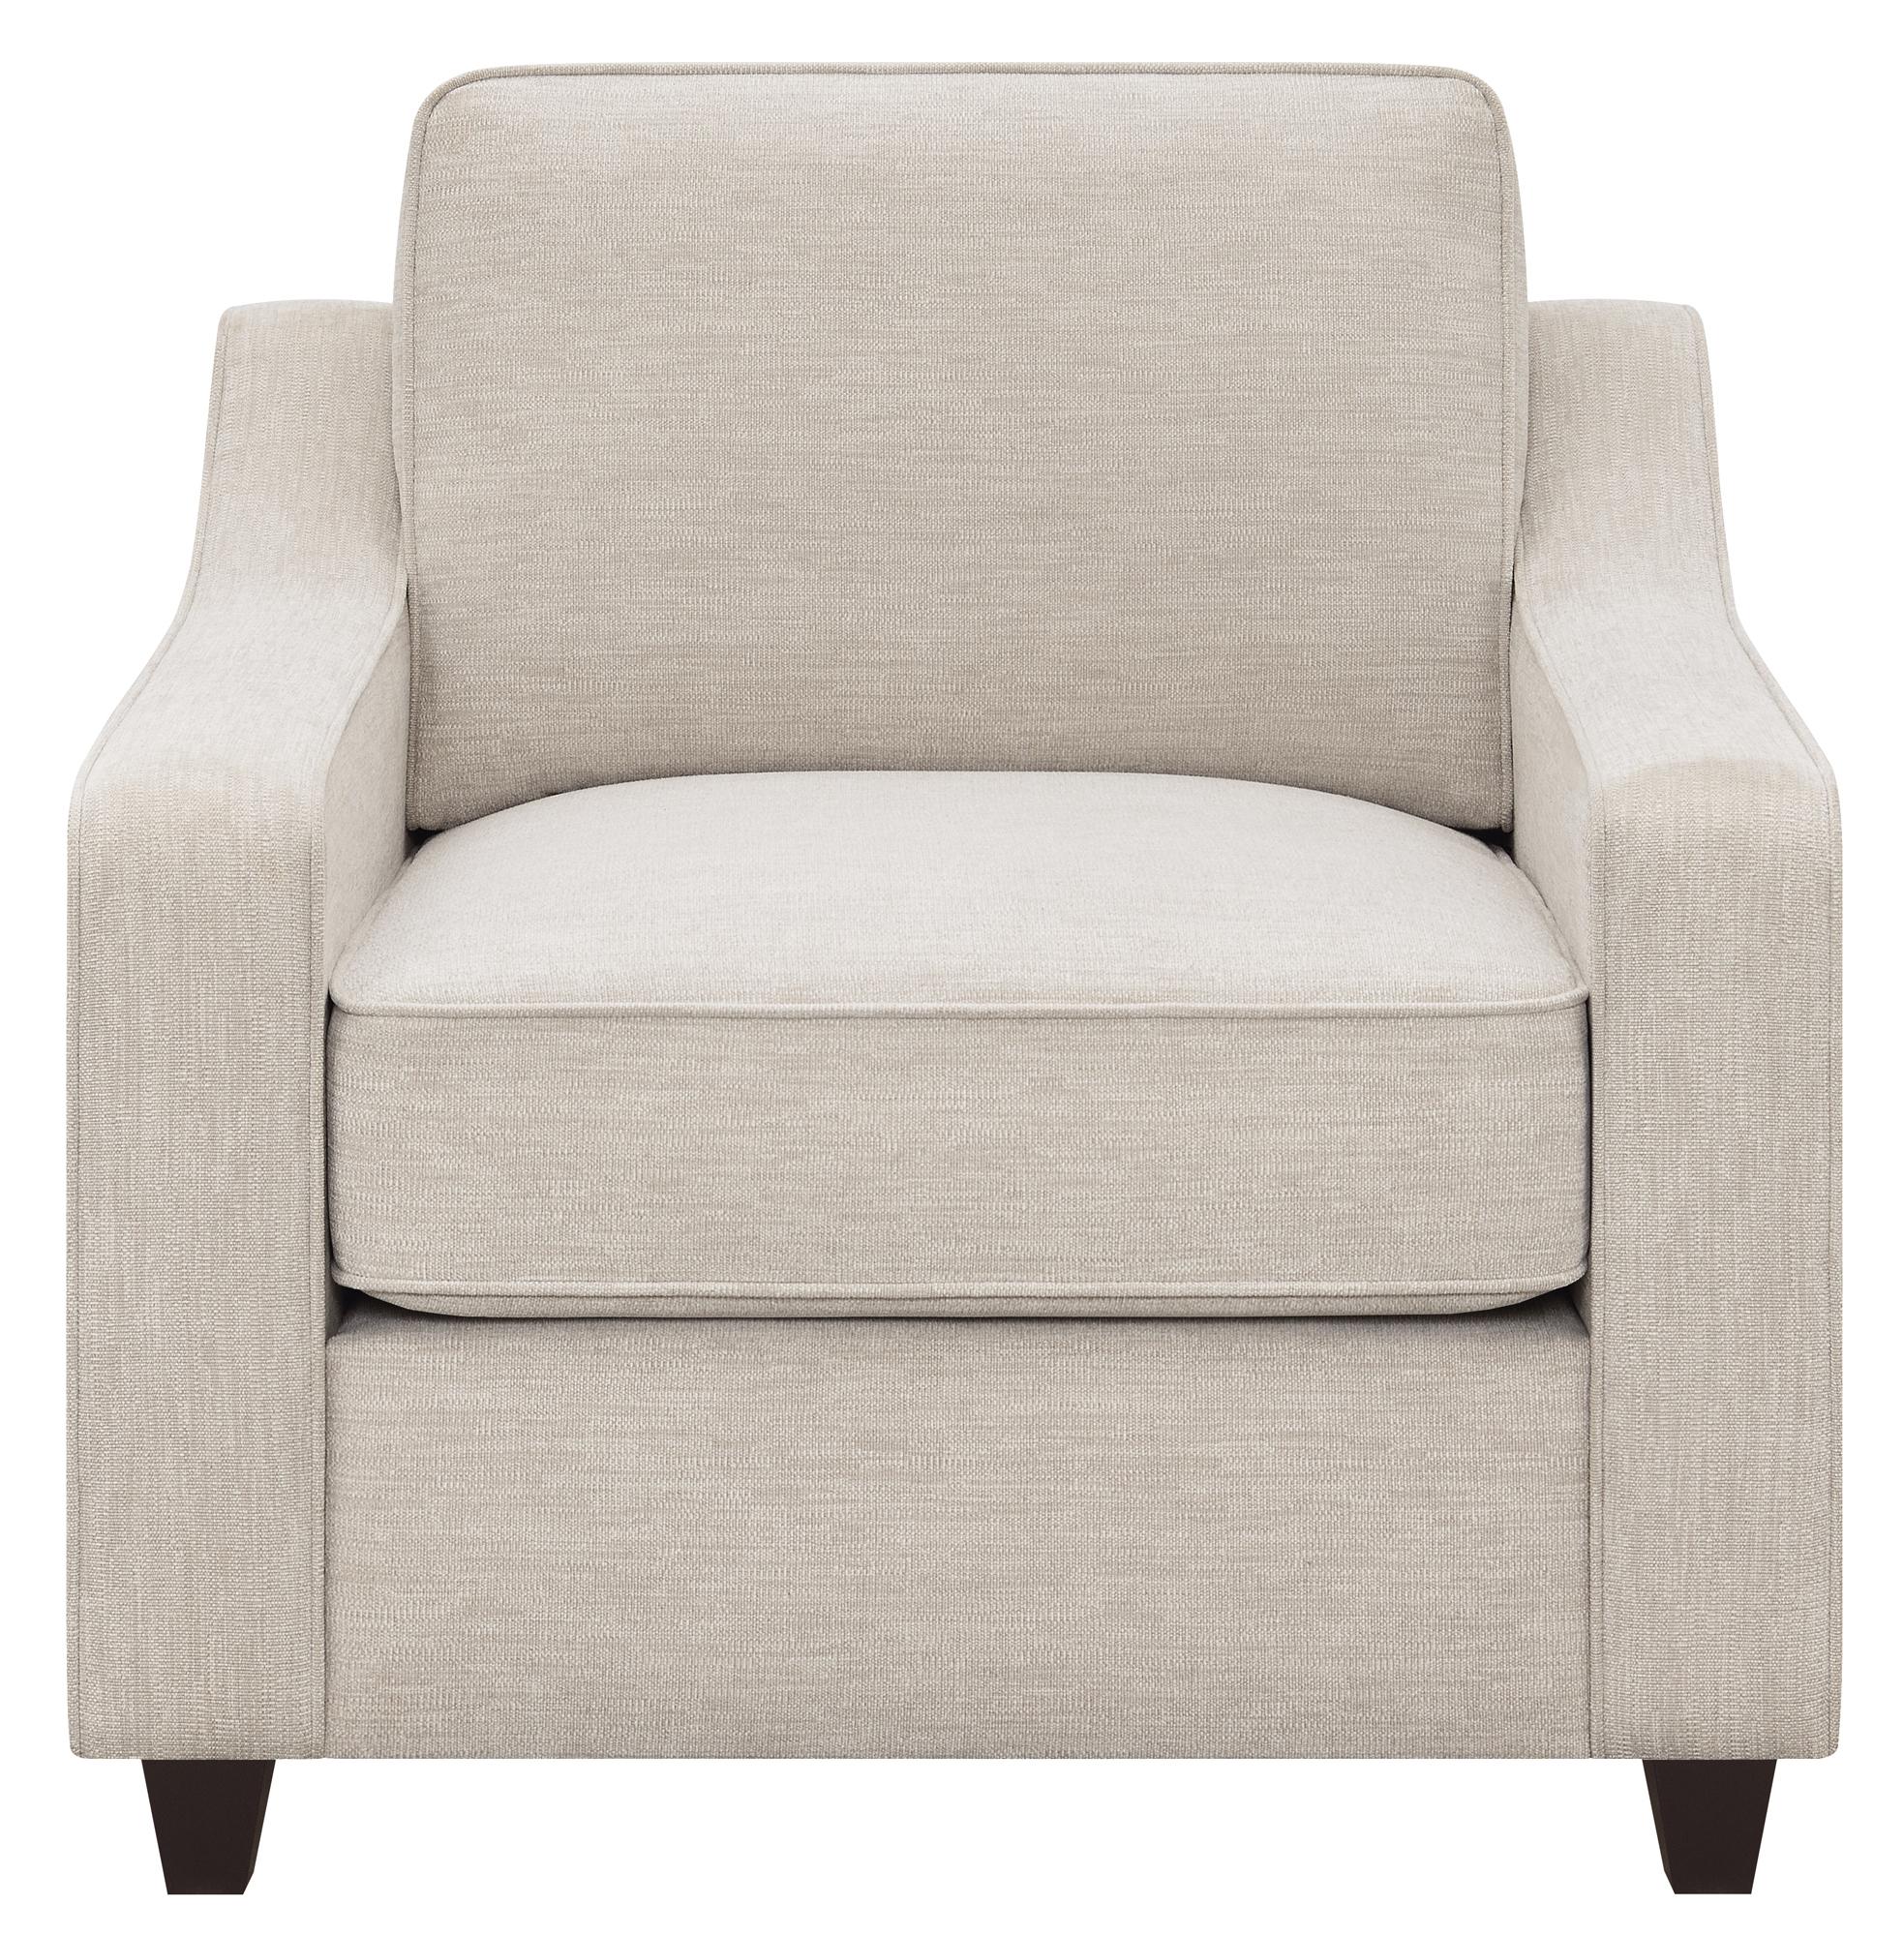 Transitional Arm Chair 552063 Christine 552063 in Beige Chenille